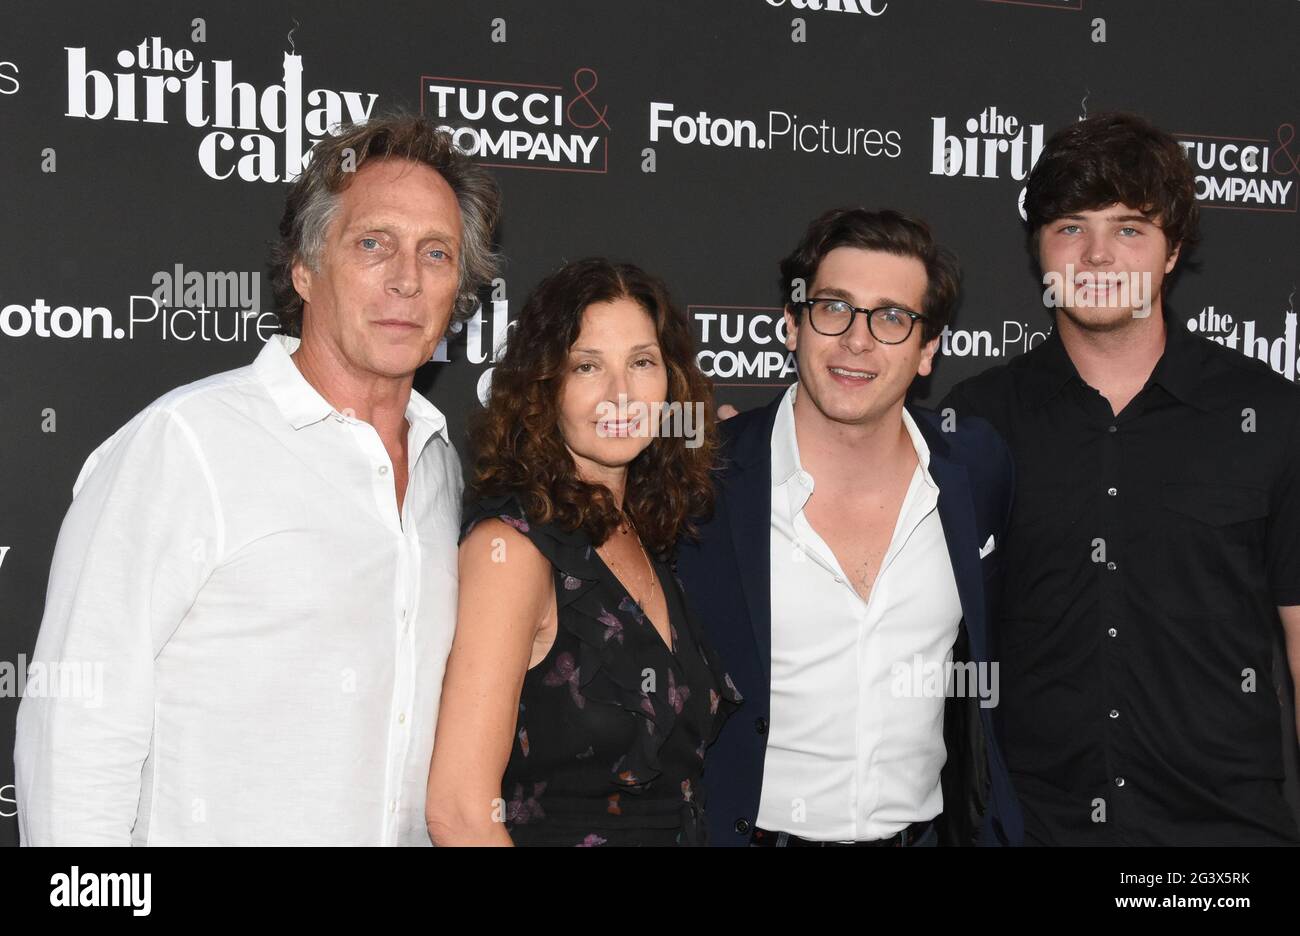 Beverly Hills, California, USA 16th June 2021 (L-R) Actor William Fichtner, Kymberly Kalil, actor Sam Fichtner and actor Vangel Fichtner attend The Los Angeles Premiere of The Birthday Cake on June 16, 2021 at Fine Arts Theater in Beverly Hills, California, USA. Photo by Barry King/Alamy Stock Photo Stock Photo